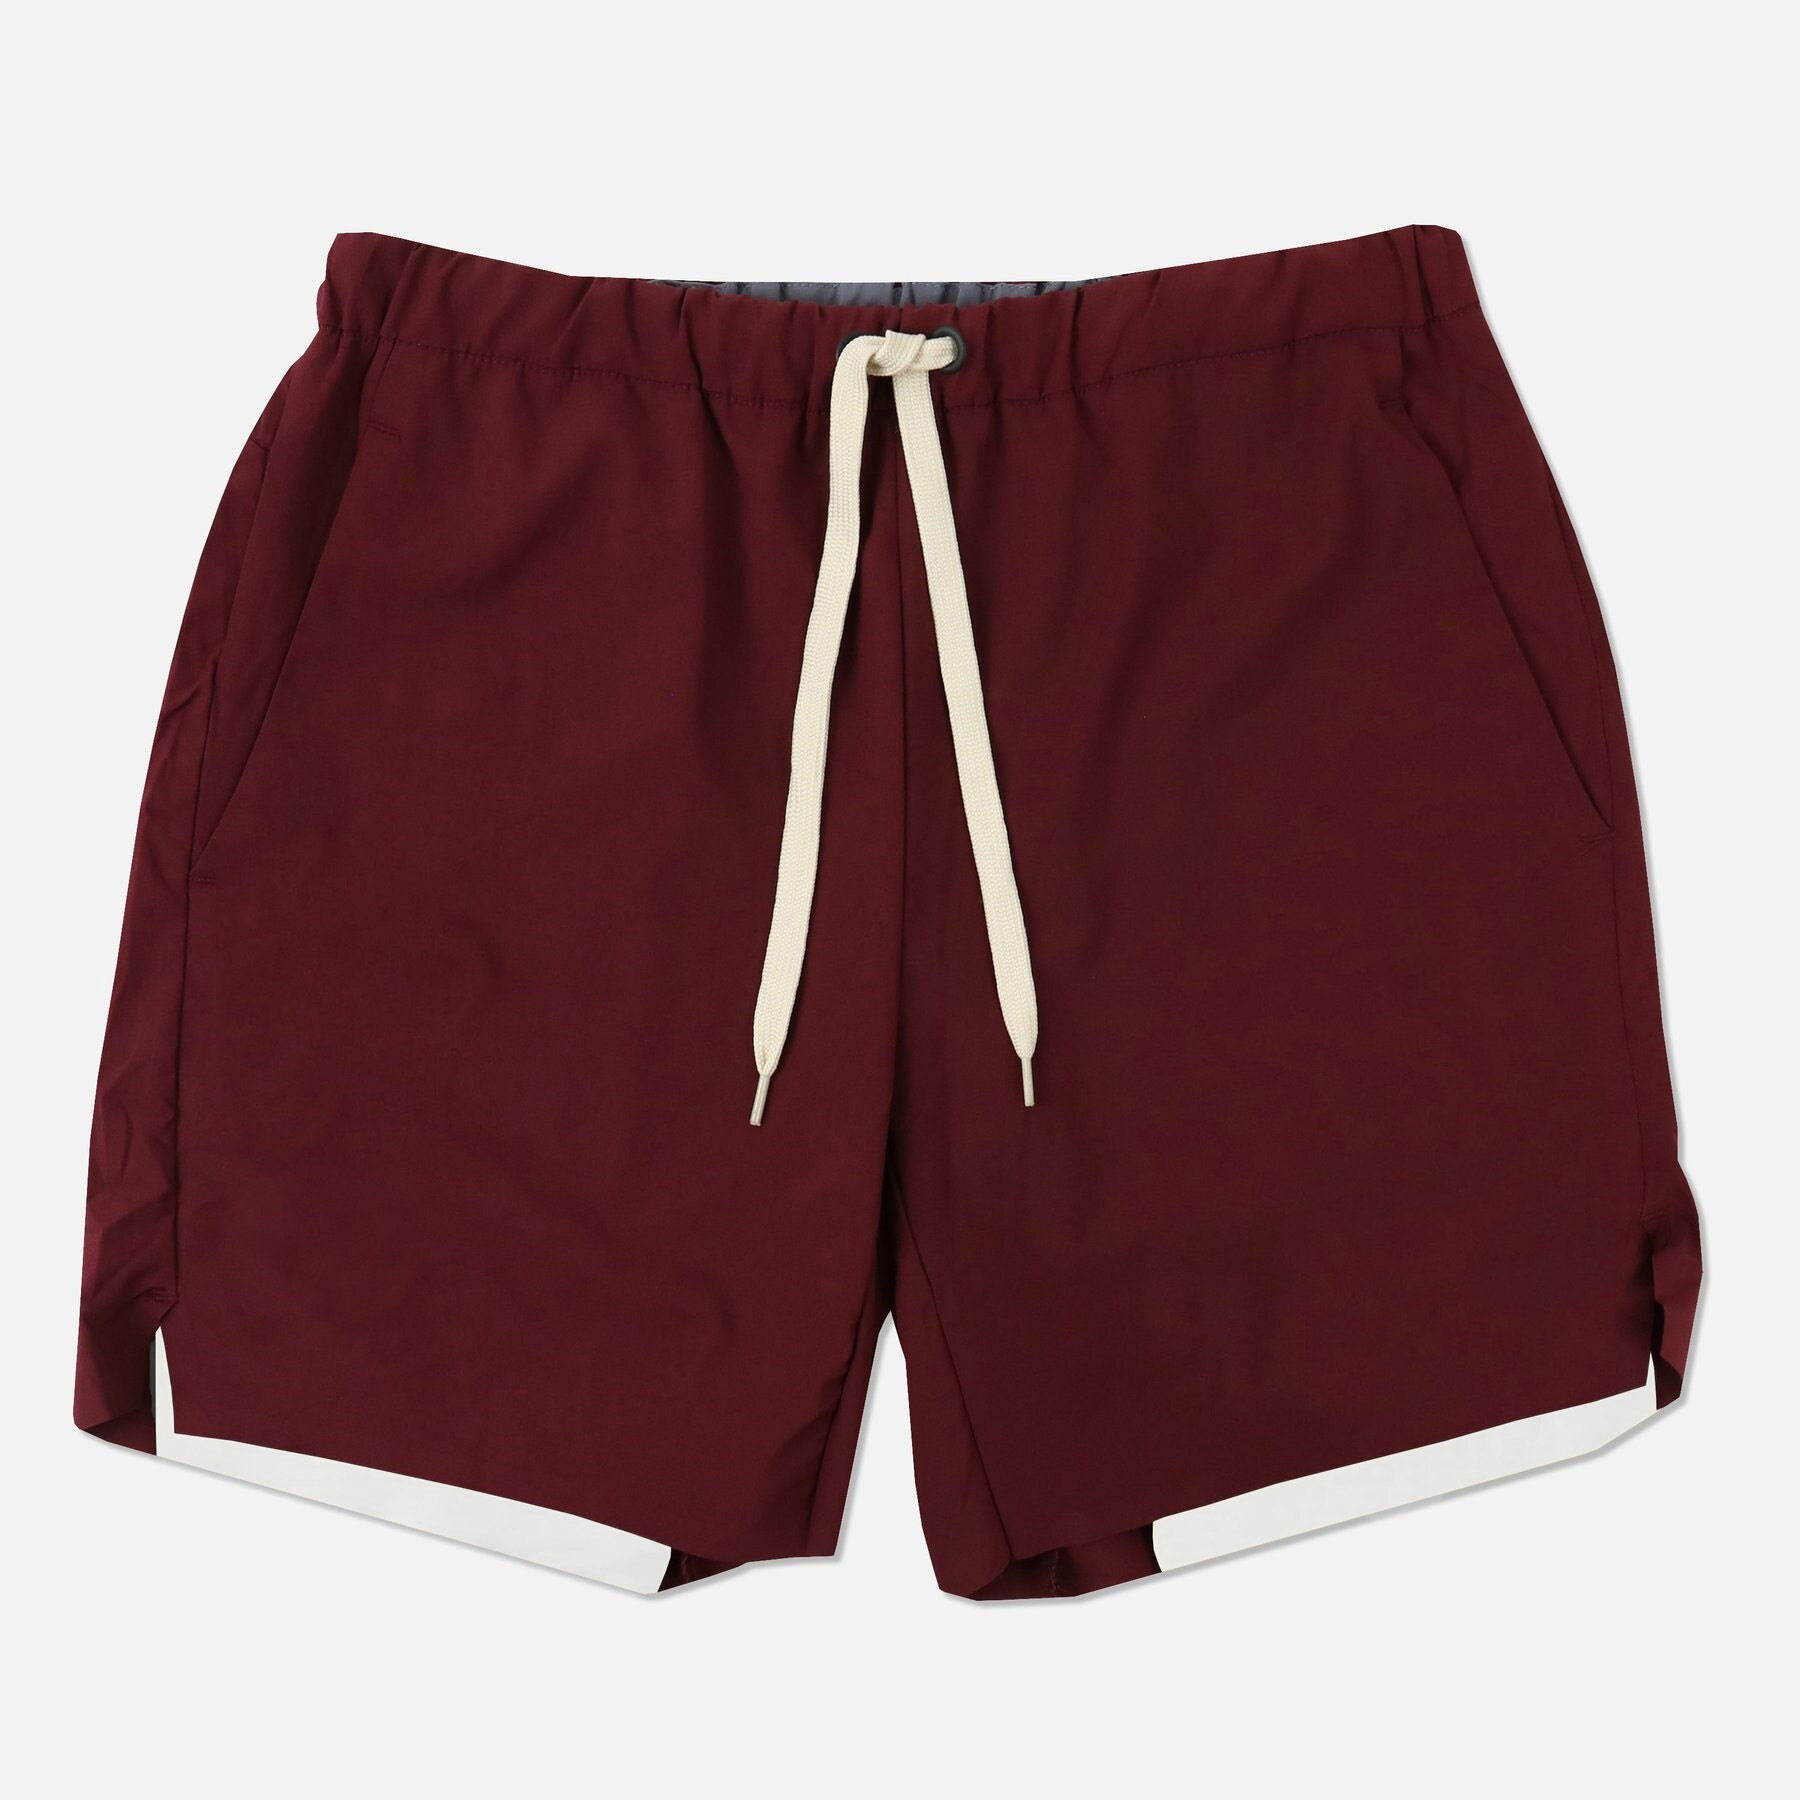 Men's Solid Color Quick-dry Double-layer Shorts